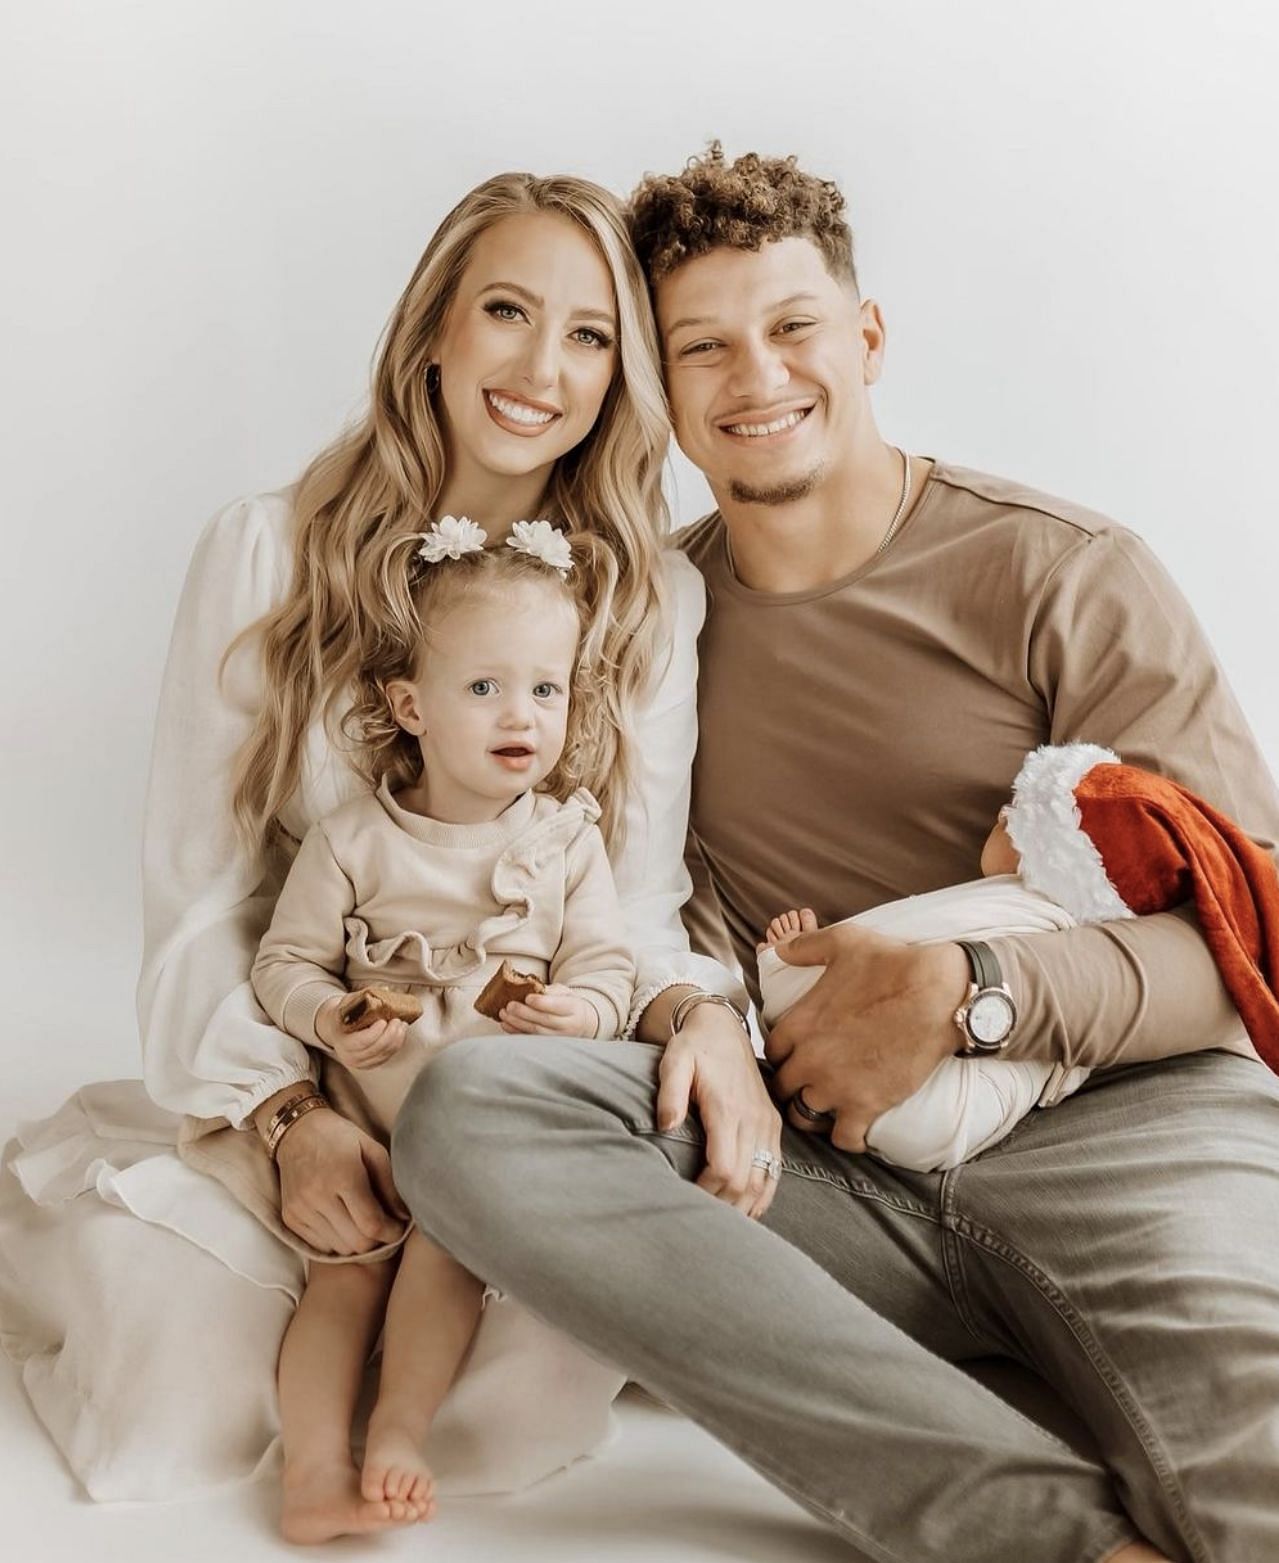 Brittany and Patrick Mahomes with their two children. Source: Patrick Mahomes IG